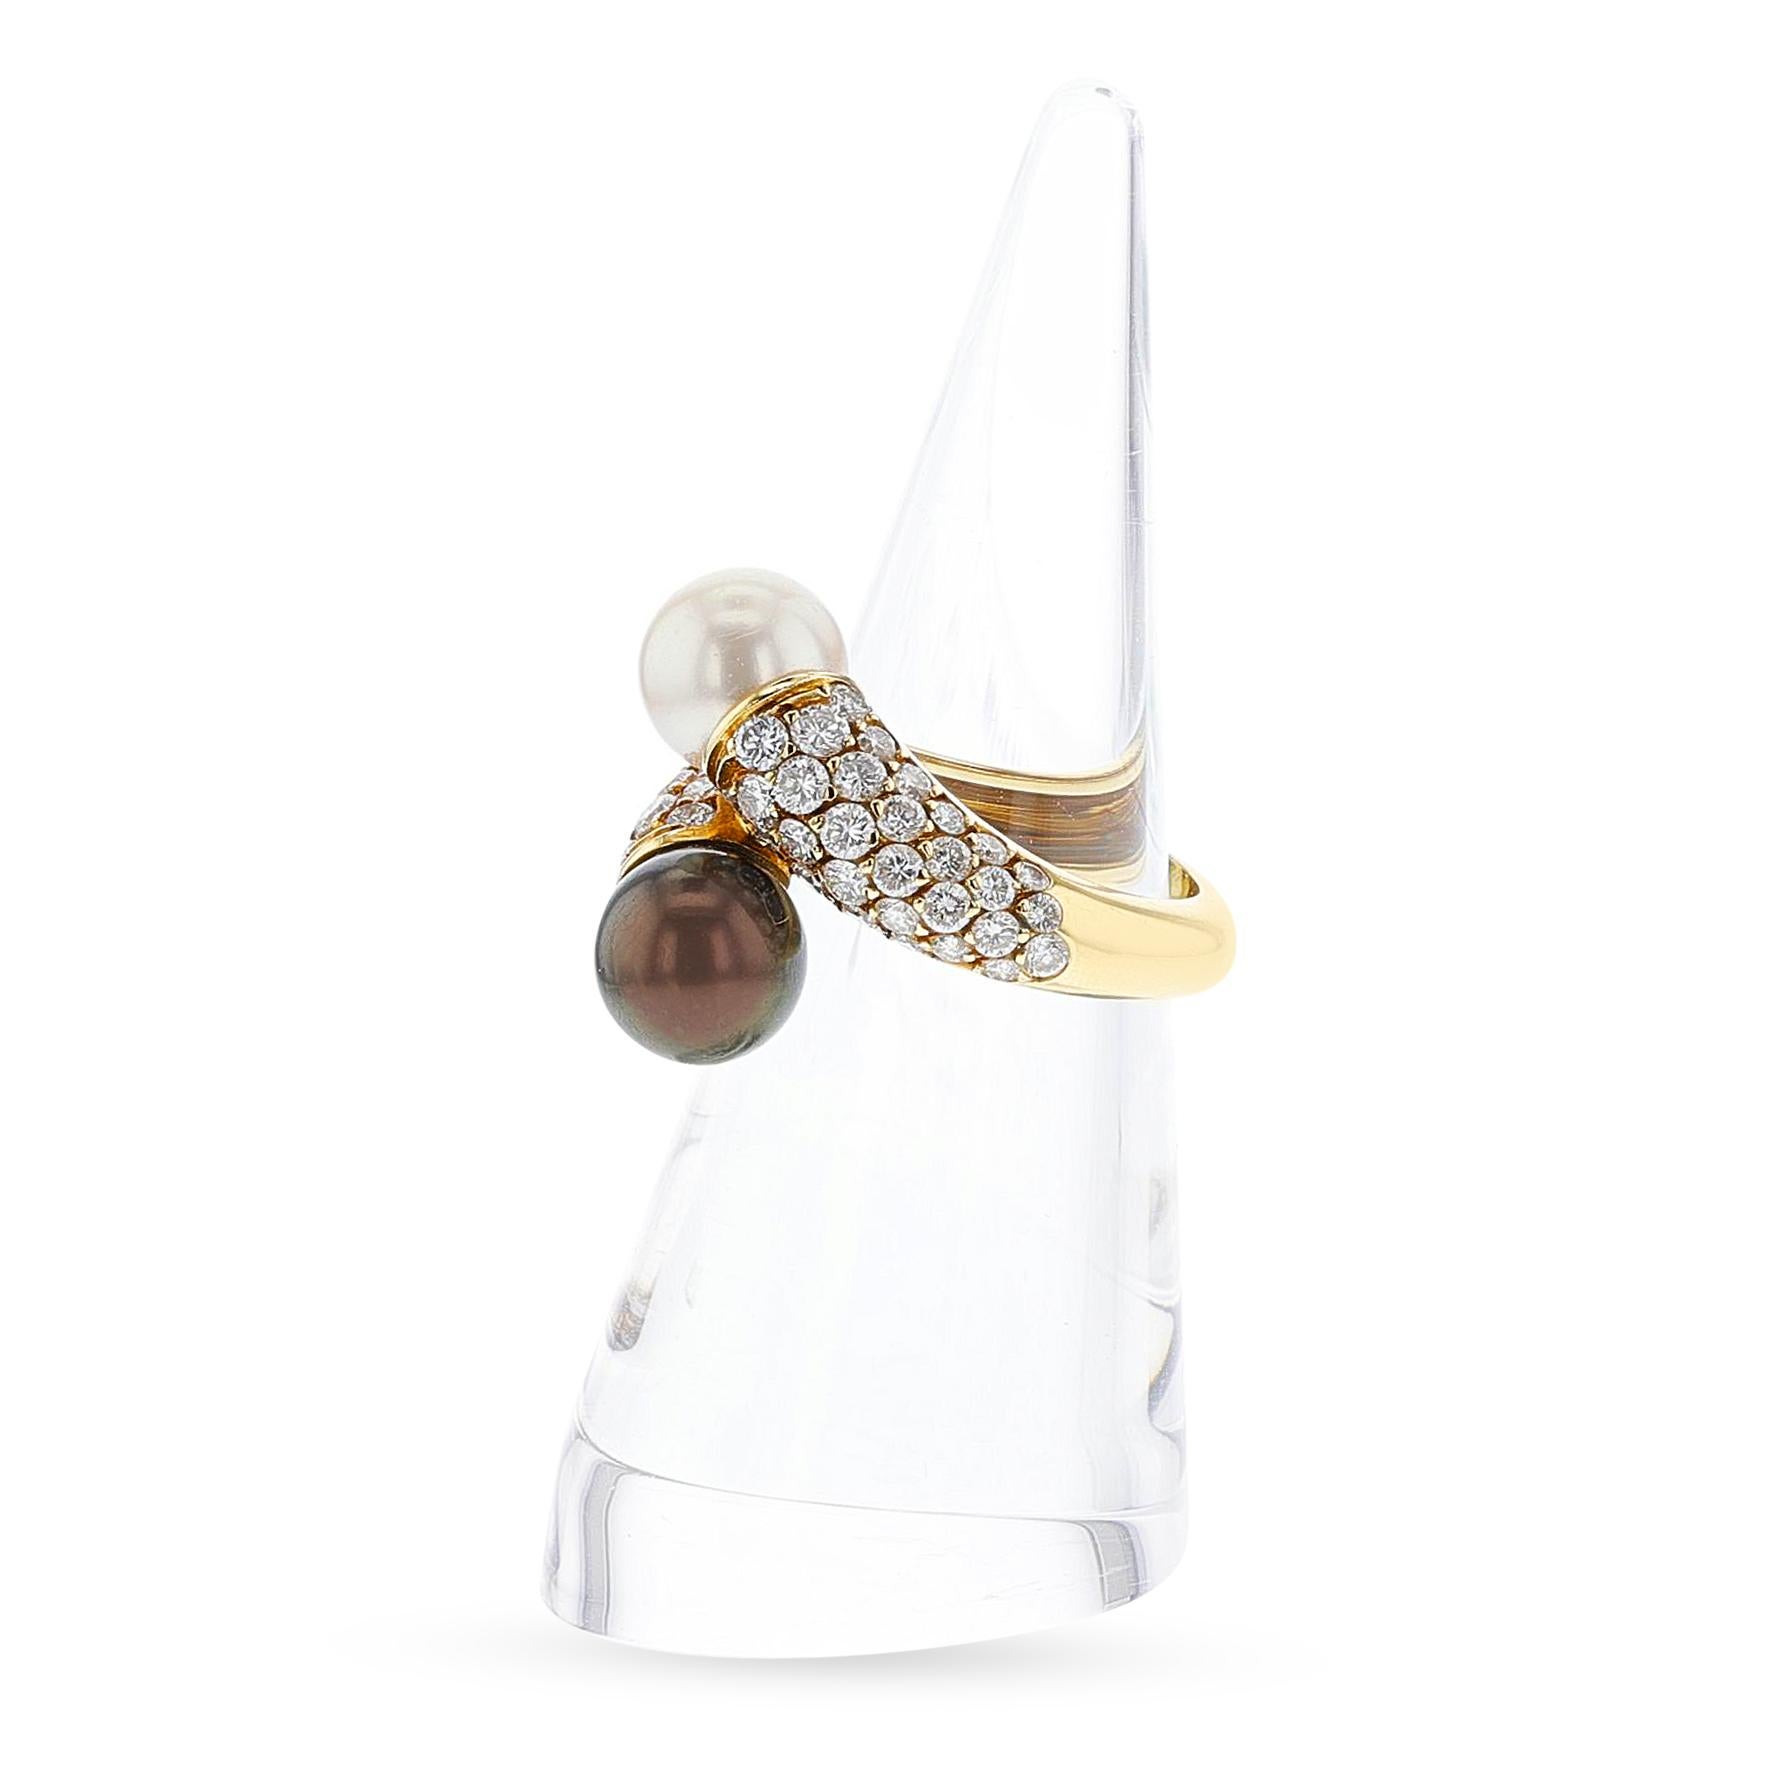 Van Cleef & Arpels Toi Et Moi Pearl Ring with Diamonds, 18k For Sale 1